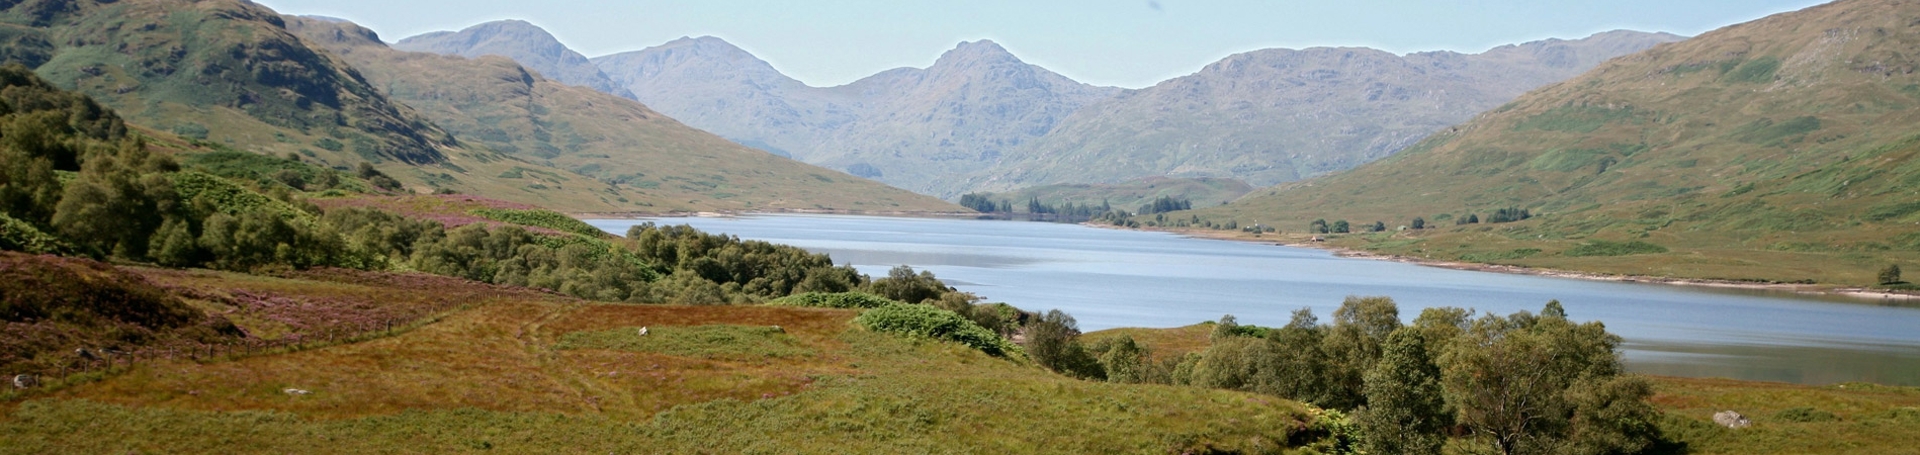 UK coach holidays with Lochs and Glens